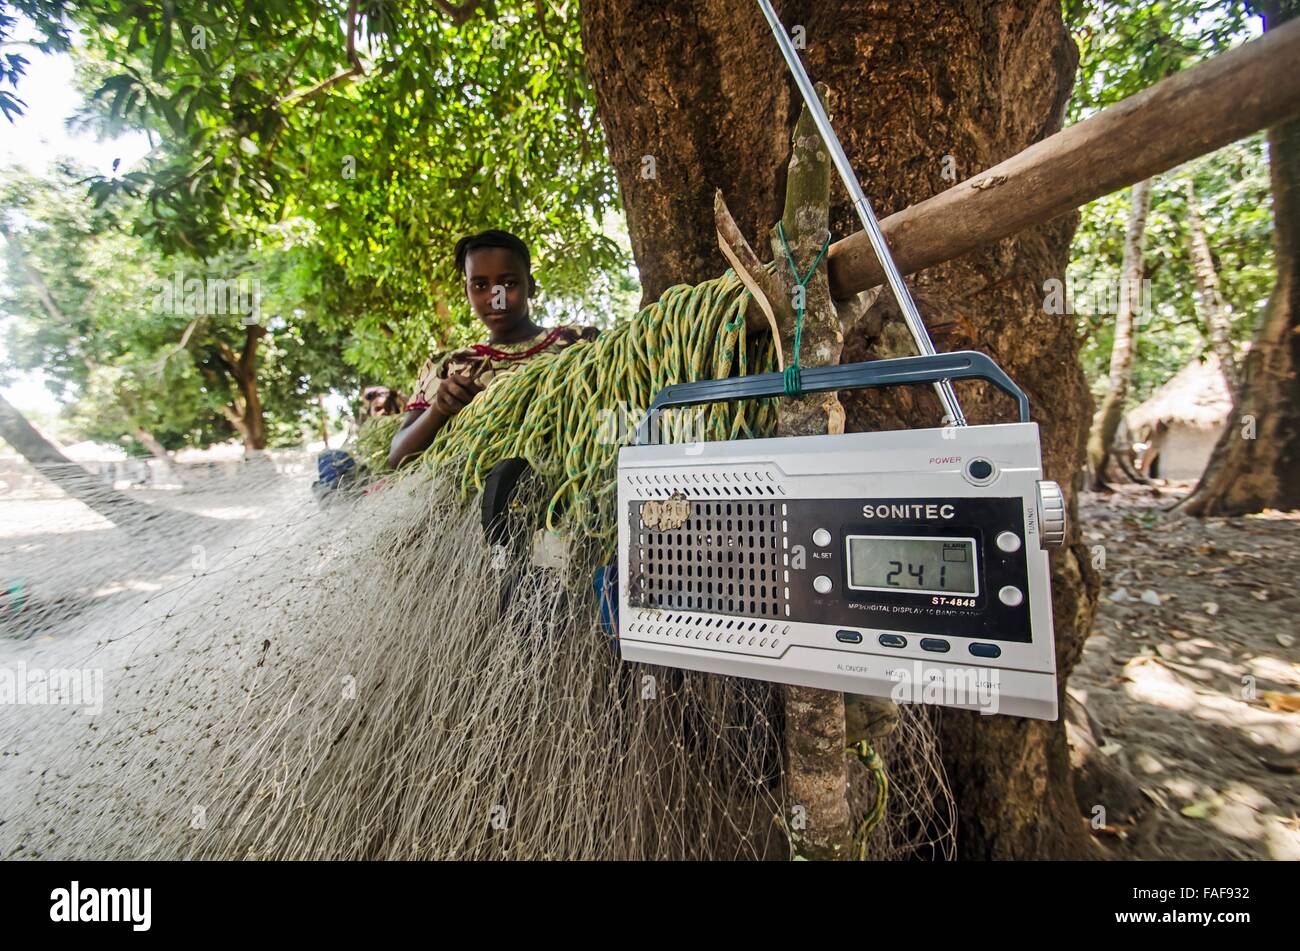 Listening to the radio while mending fishing nets in southern Sierra Leone  Stock Photo - Alamy